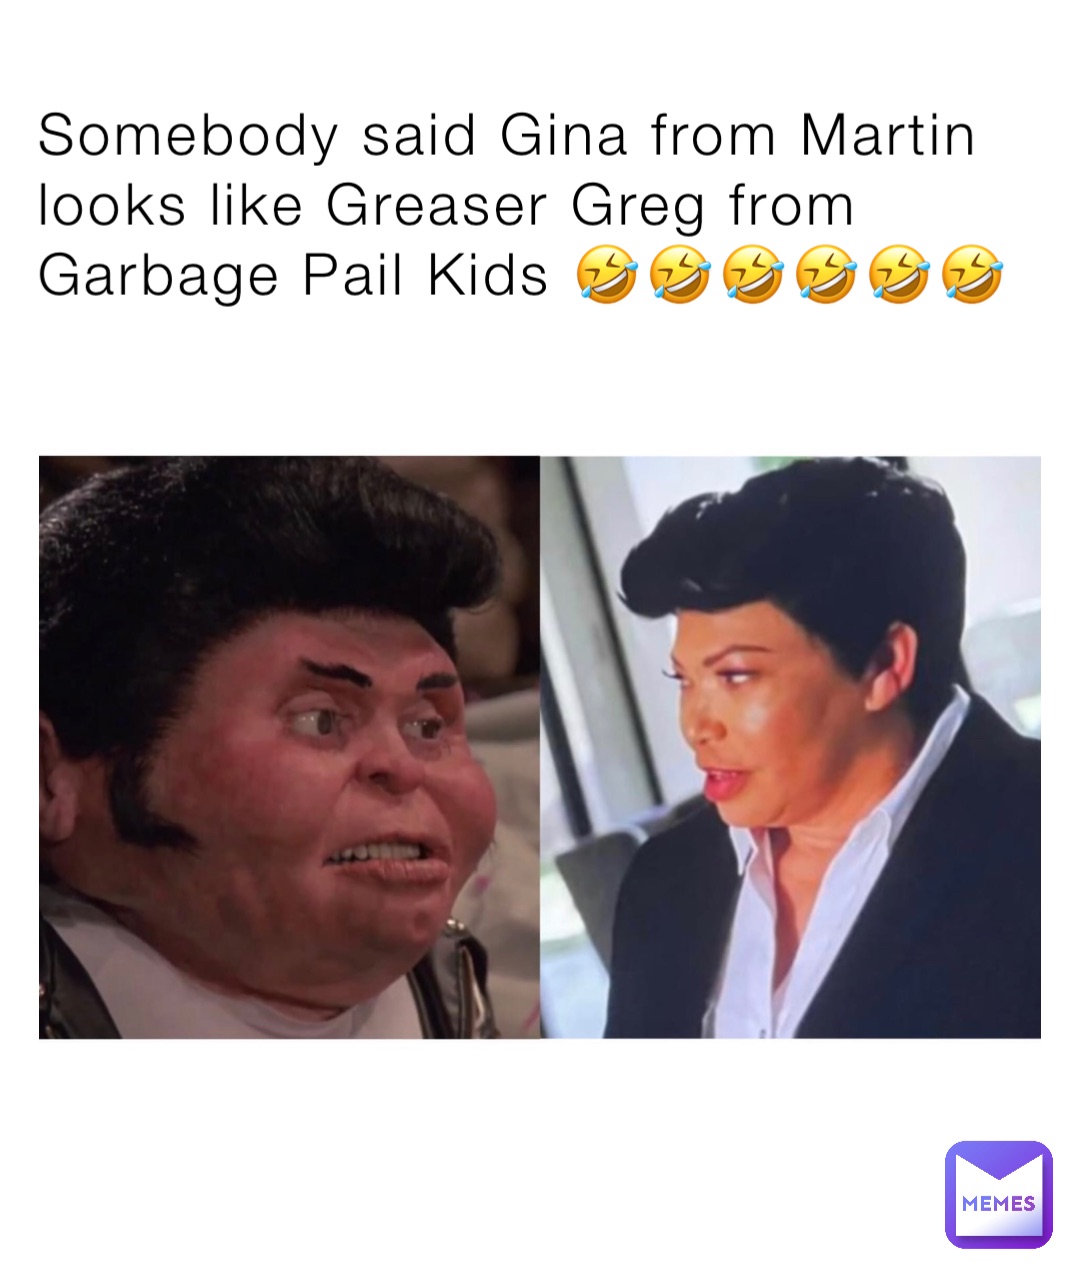 Somebody said Gina from Martin looks like Greaser Greg from Garbage Pail Kids 🤣🤣🤣🤣🤣🤣